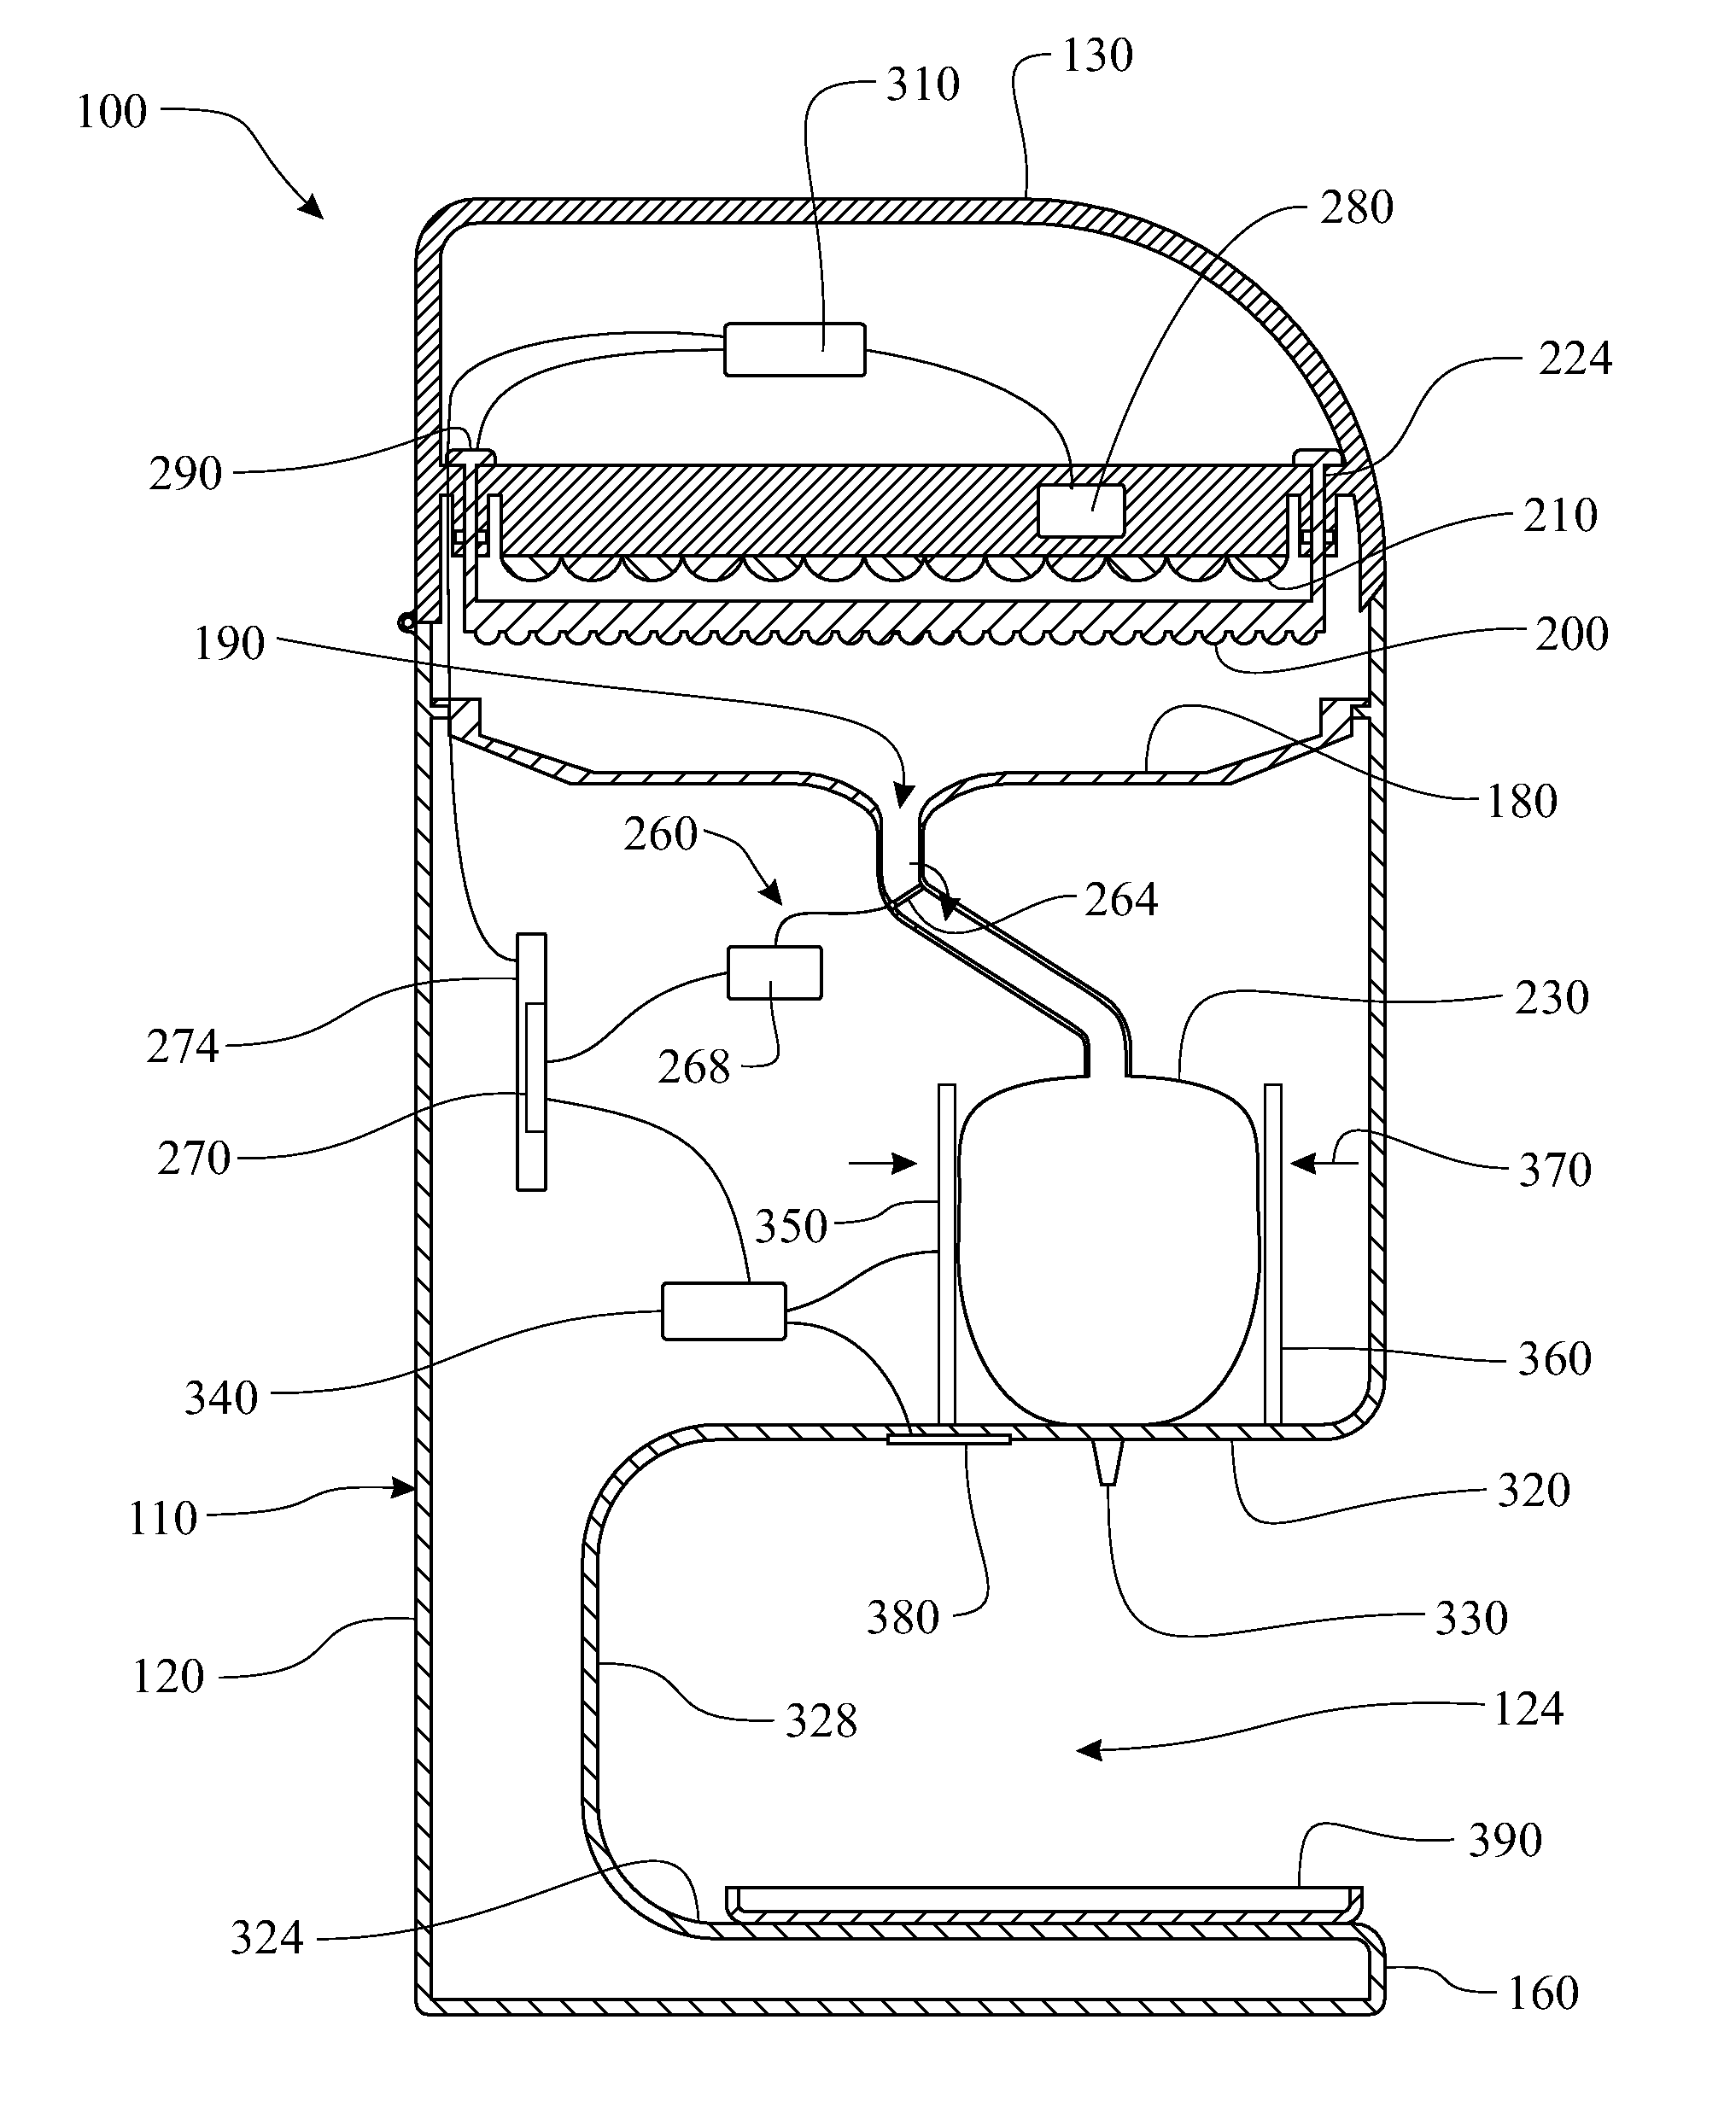 Soap recycling device and method of operation